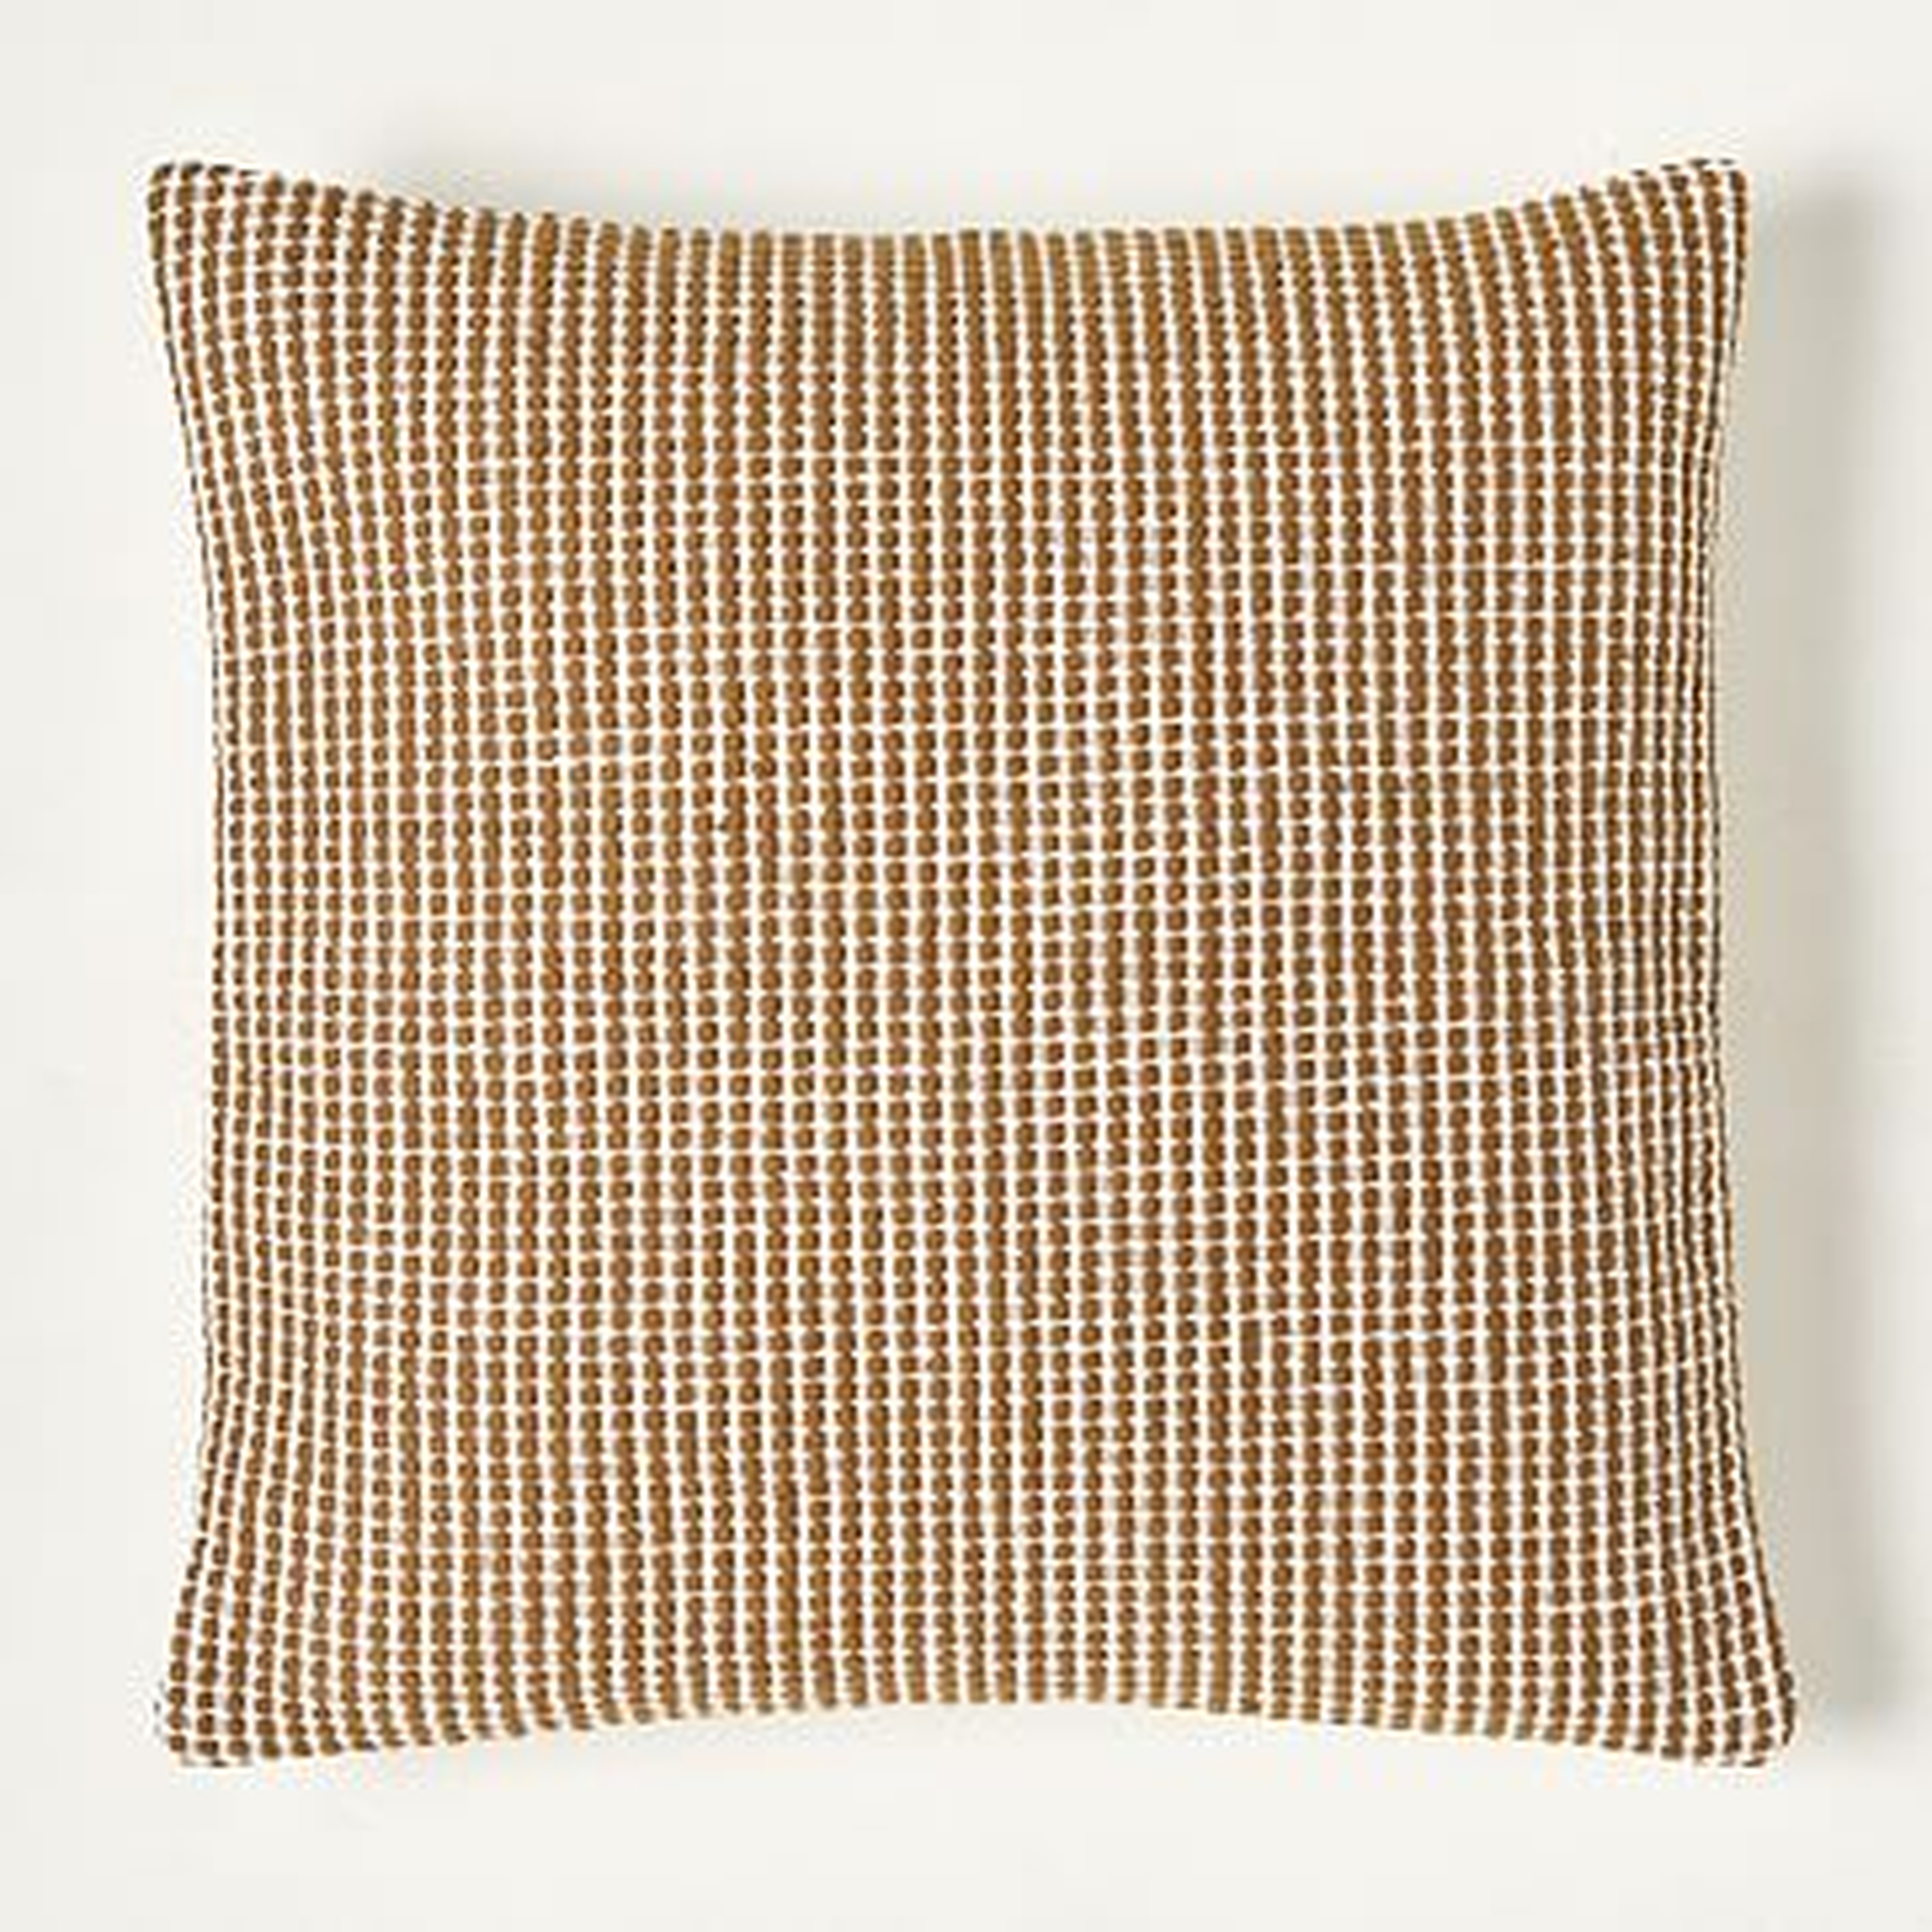 Textured Dimple Dot Pillow Cover, 20"x20", Bronze Brown, Set of 2 - West Elm